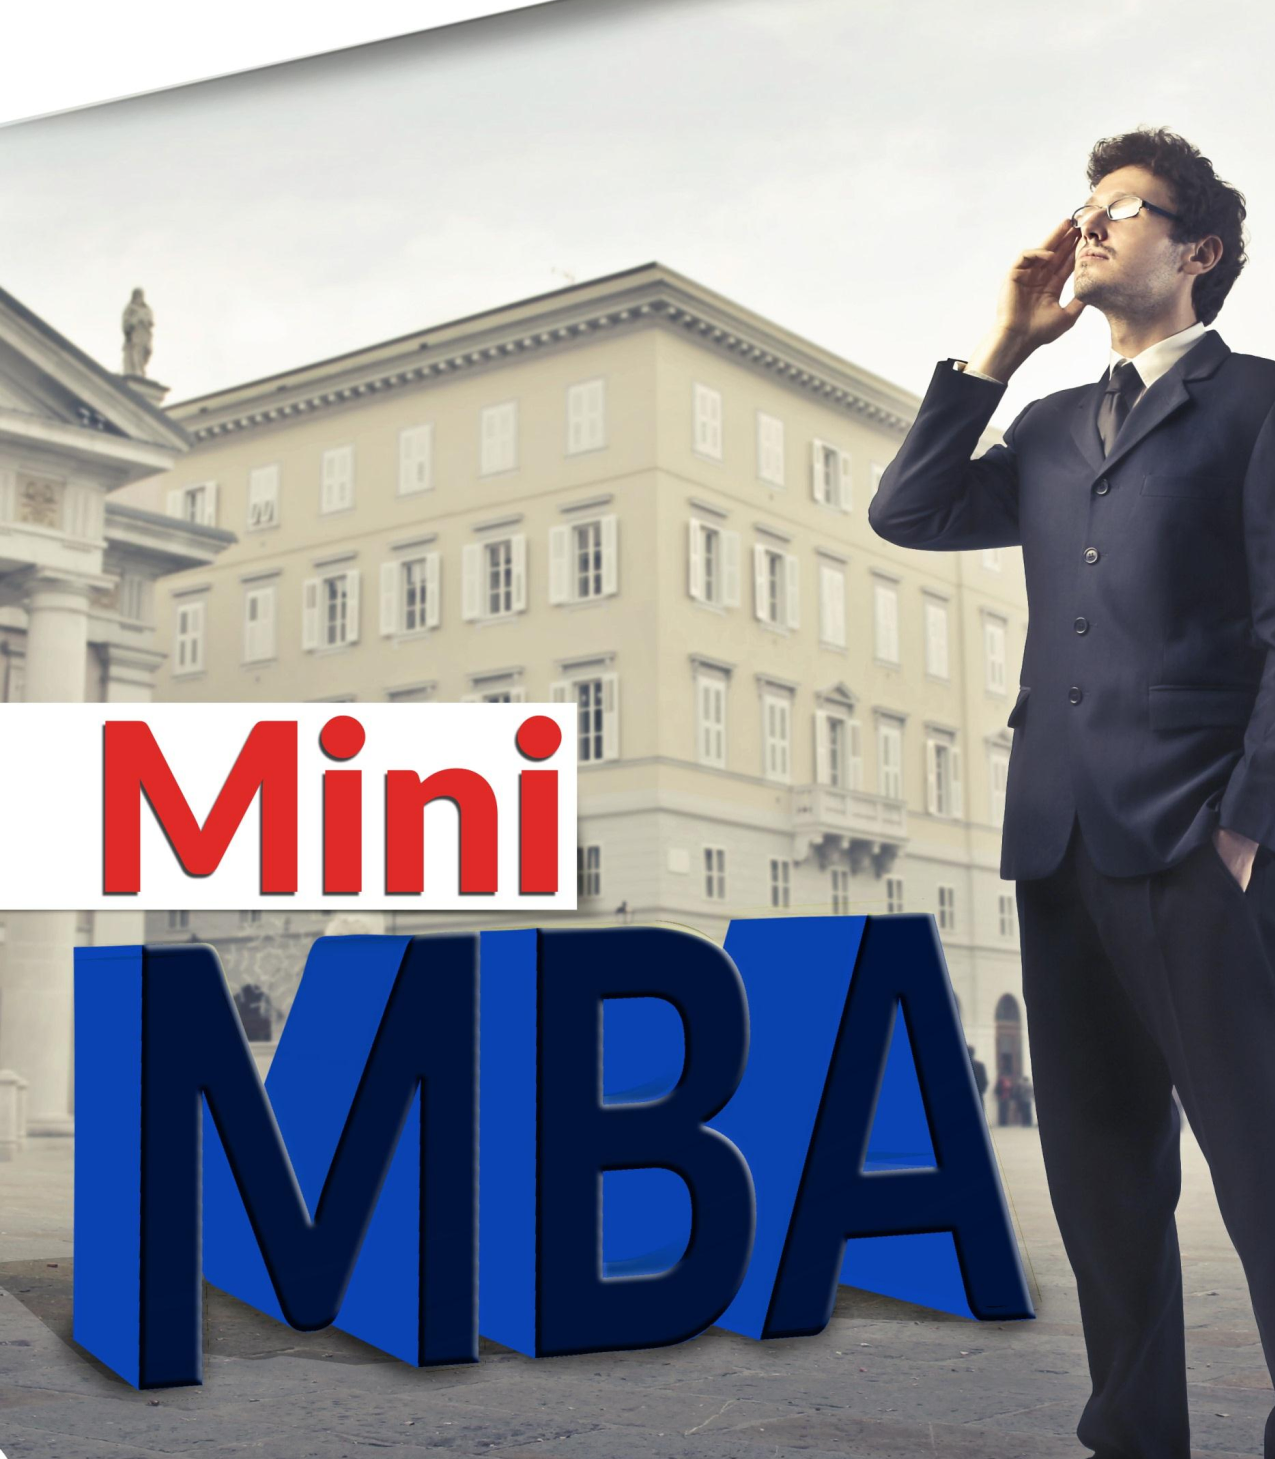 Digital marketing courses after mba